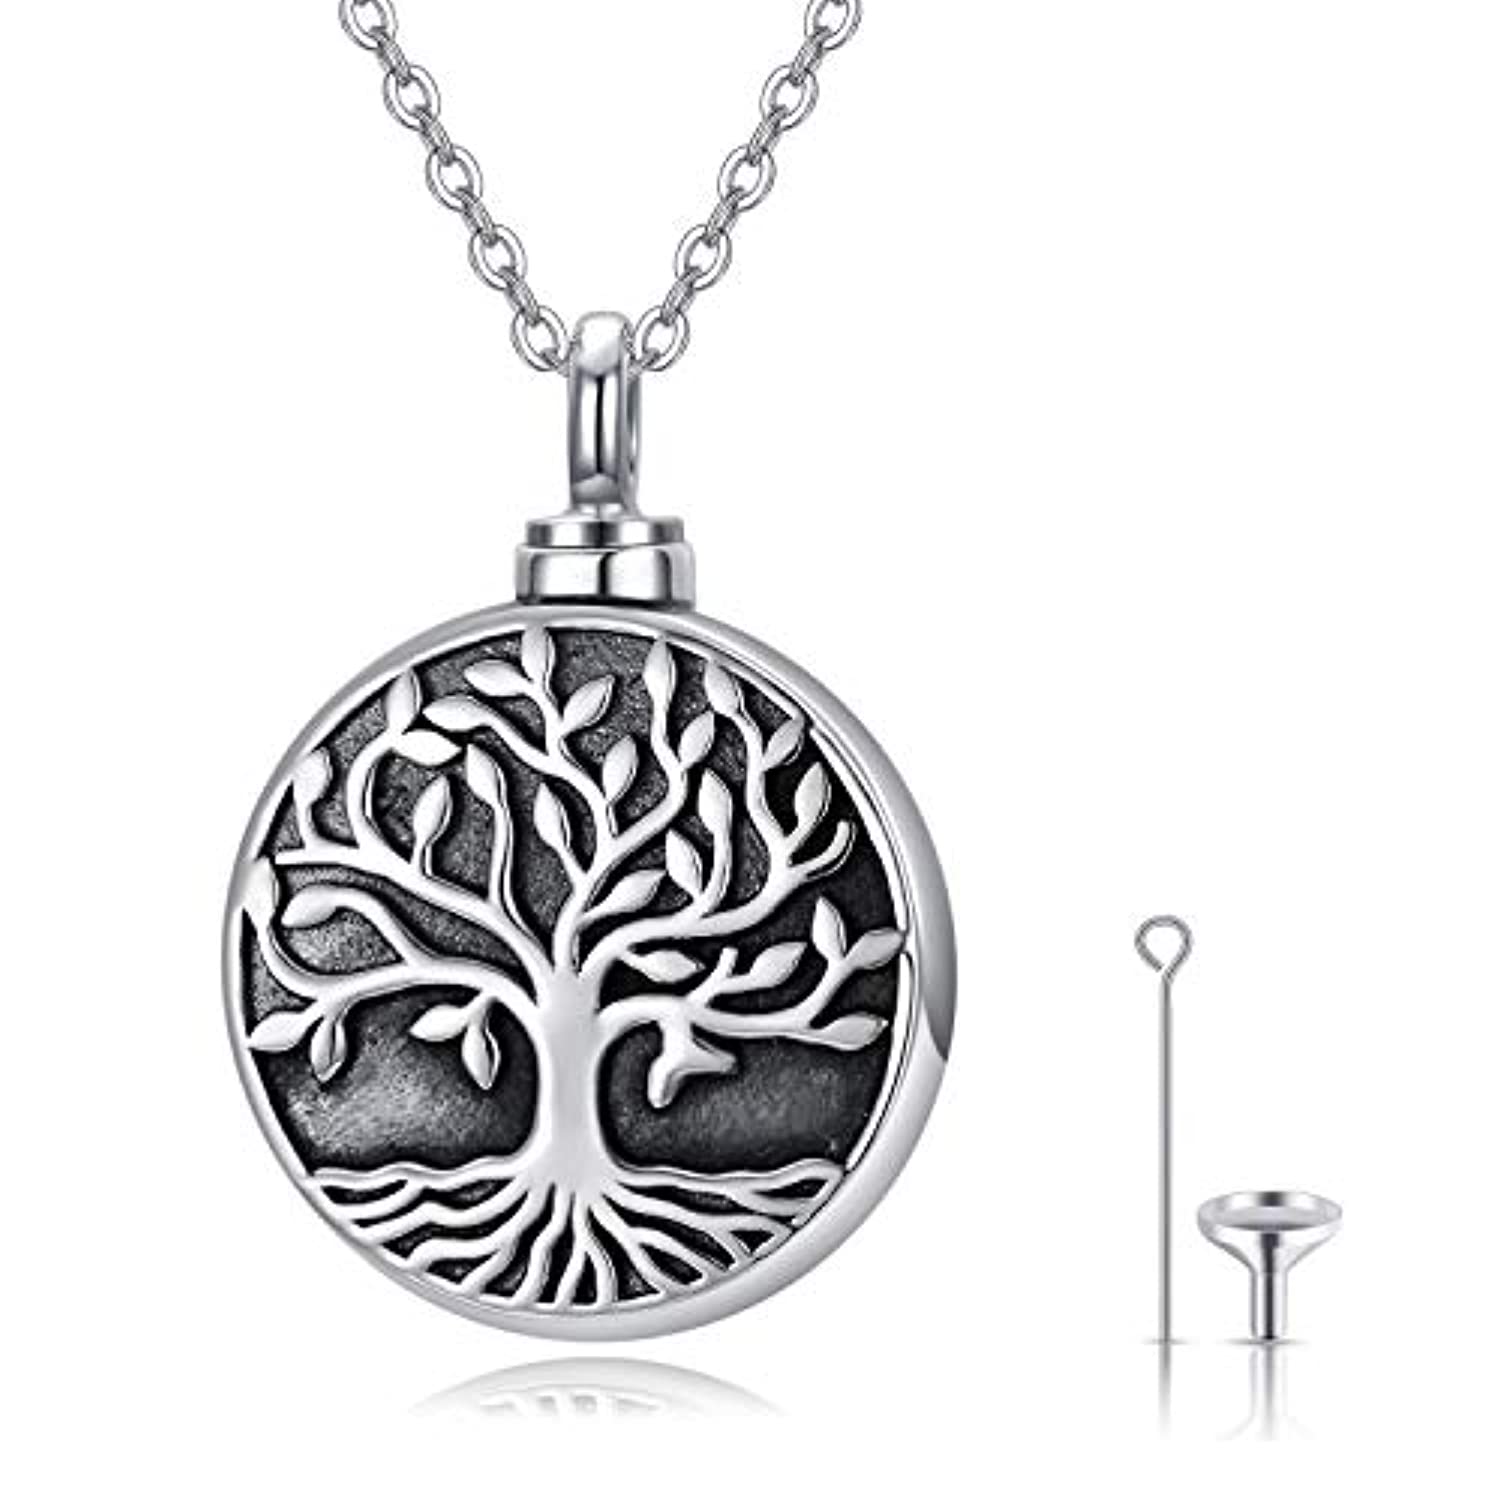 Men's Sterling Silver Tree of Life Pendant Necklace - Jewelry1000.com